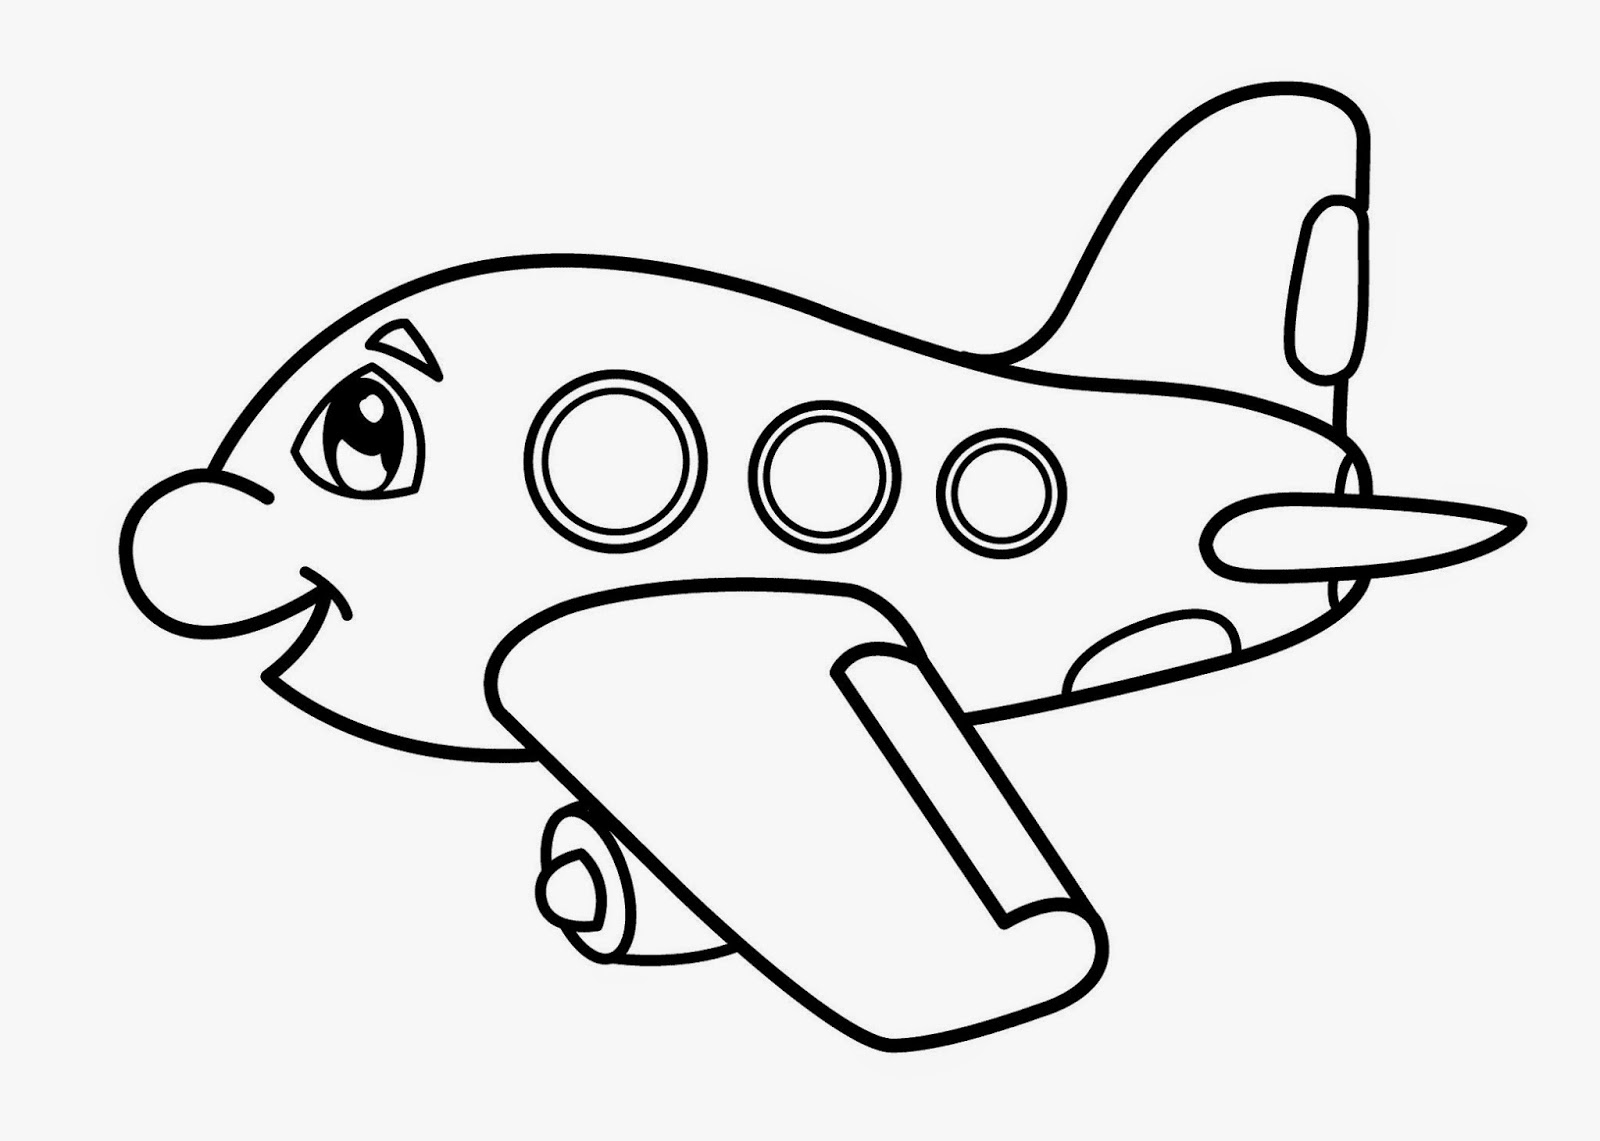 7 Best Images of Airplane Letter A Worksheets - Letter Tracing